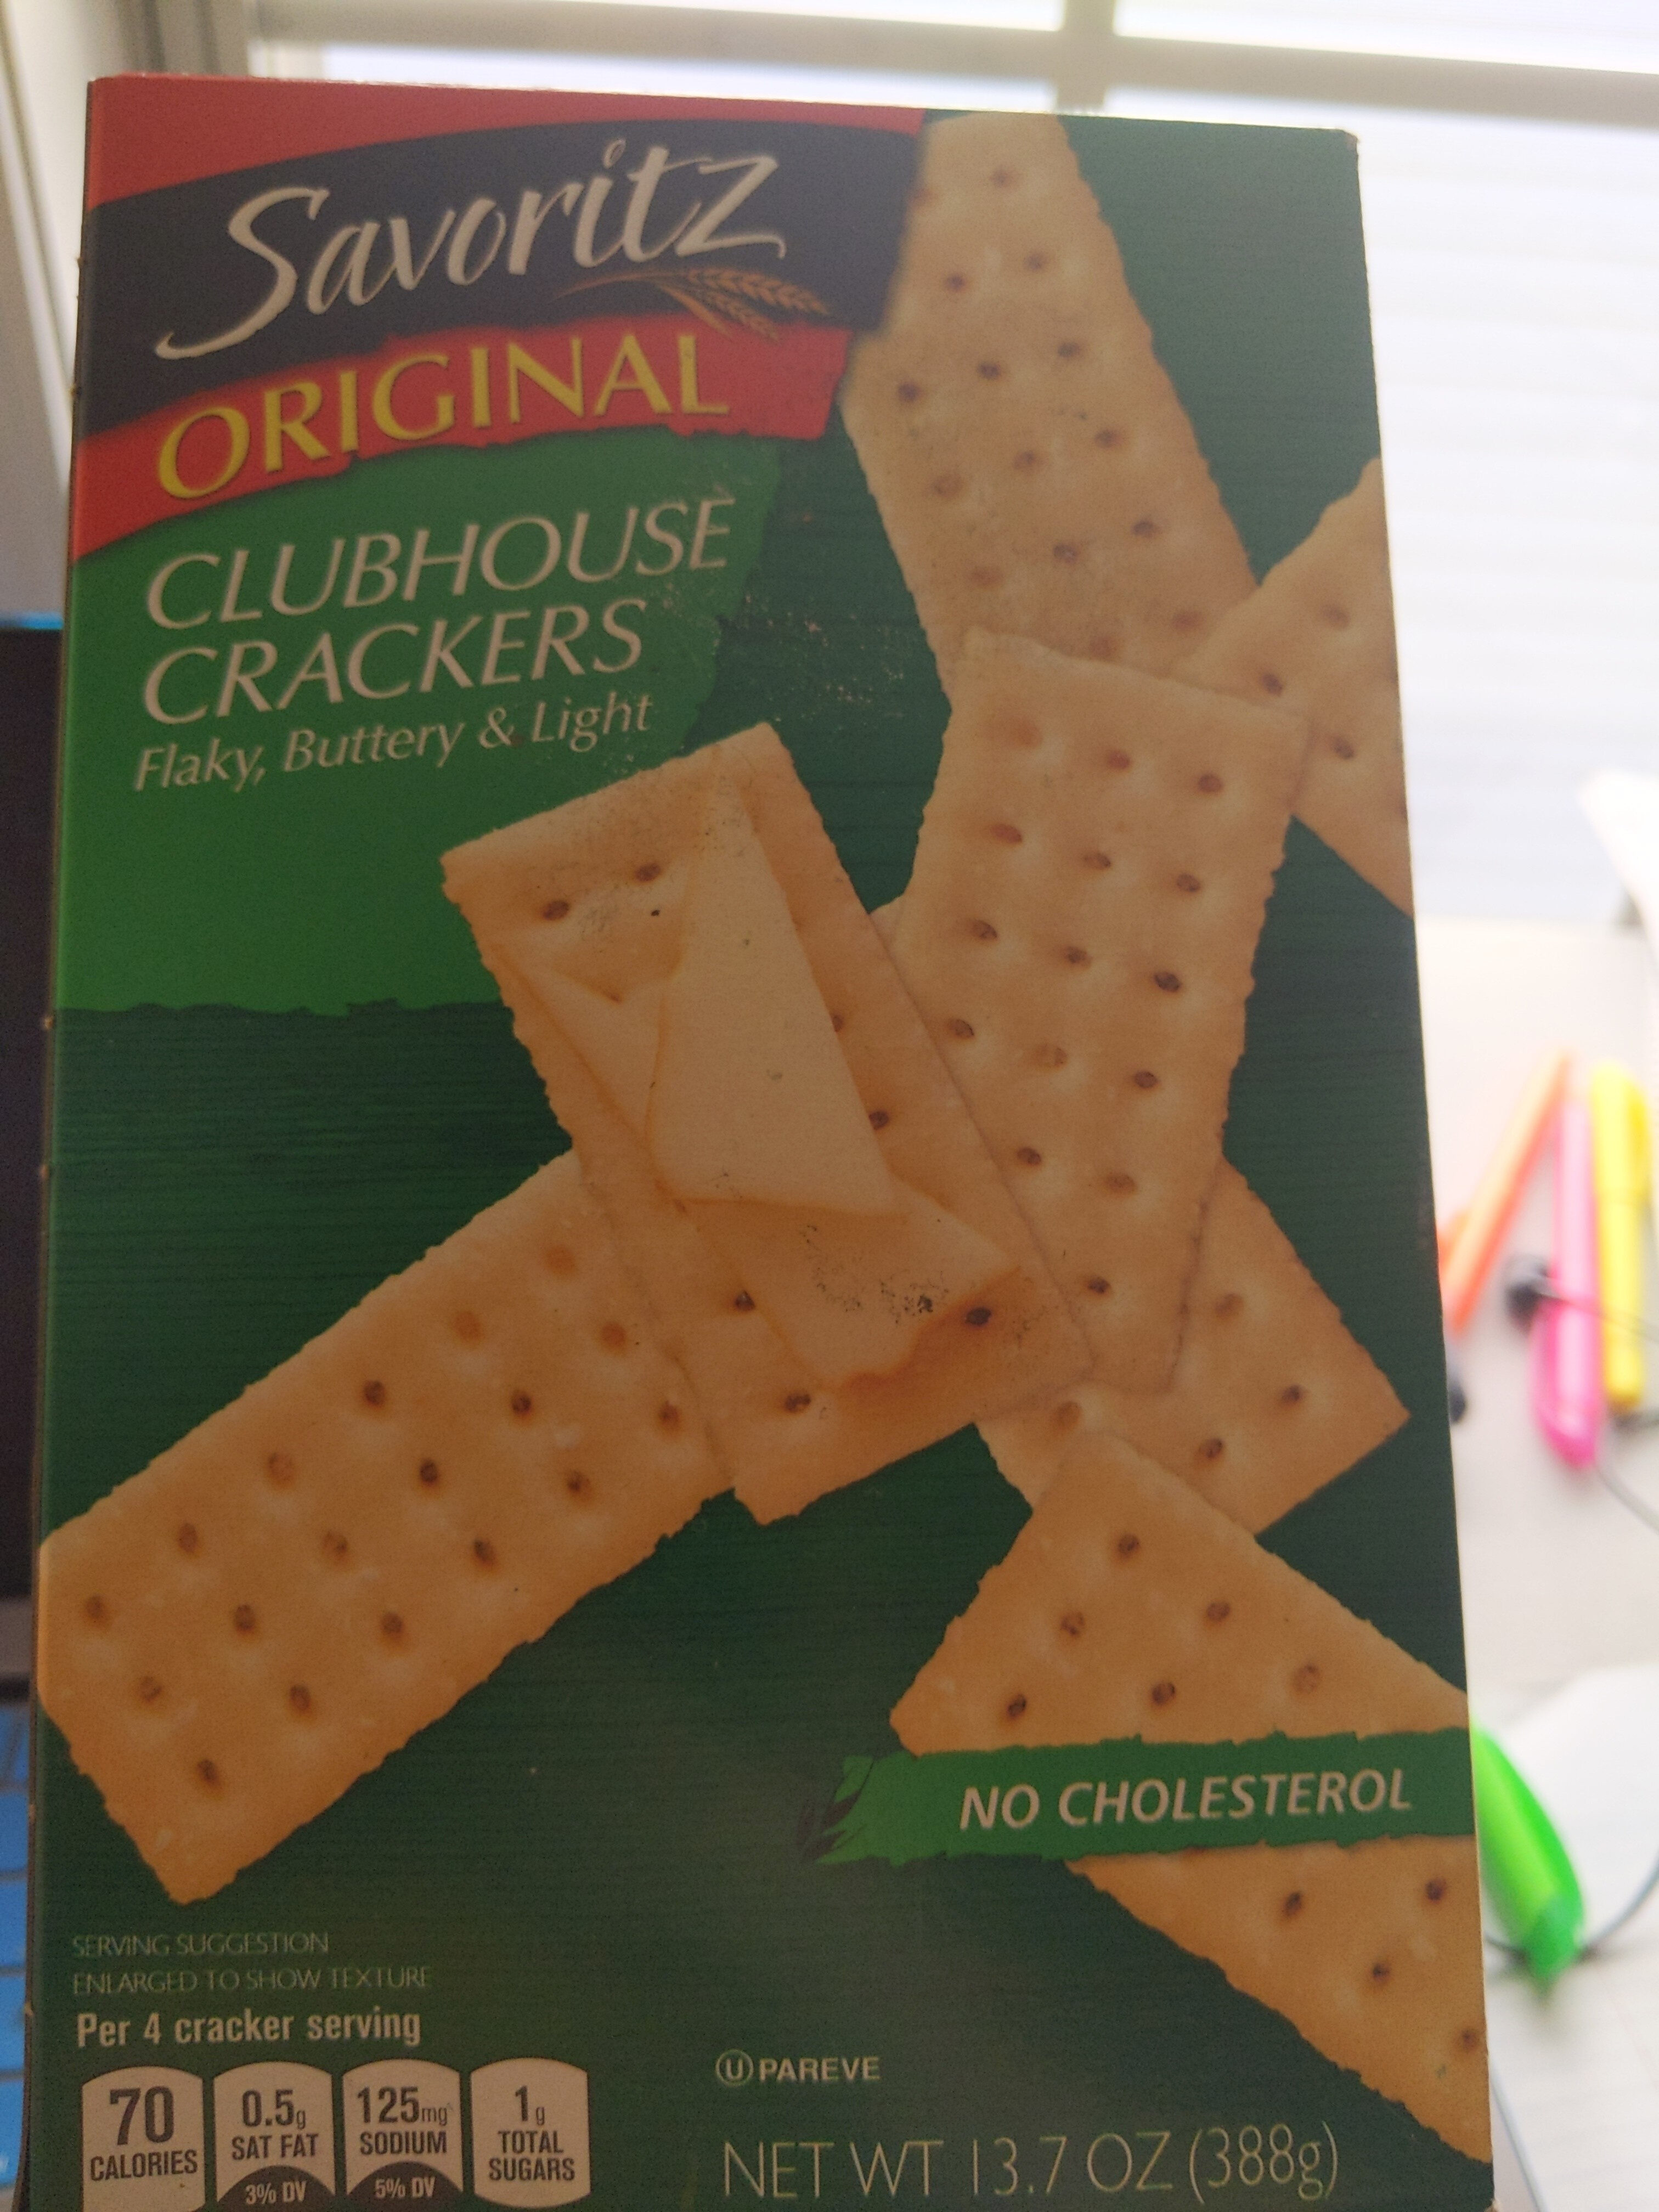 clubhouse crackers - Tuote - en